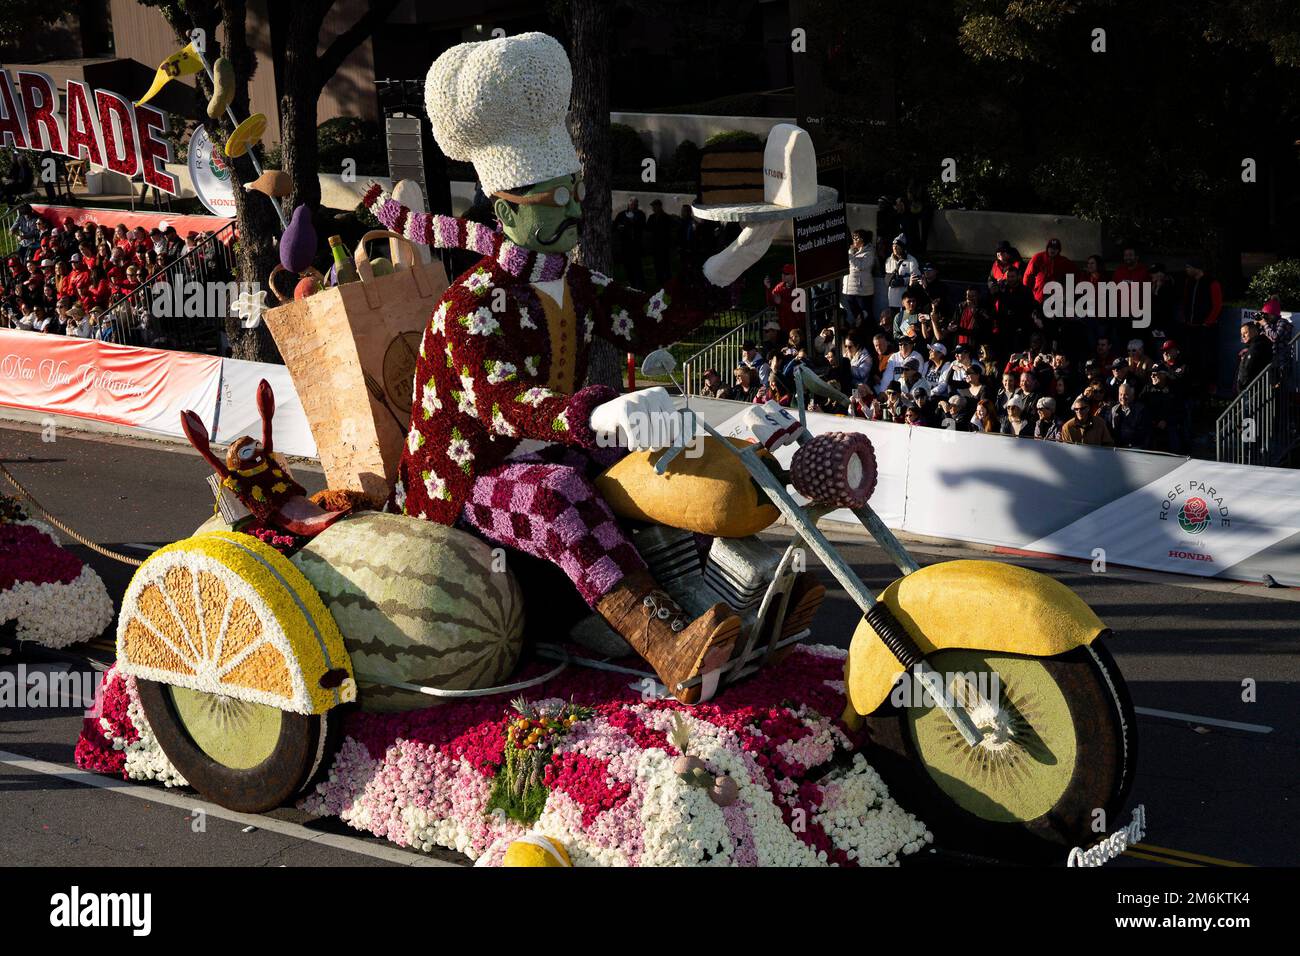 The Trader Joe's float moves down the street in the 134th annual Rose